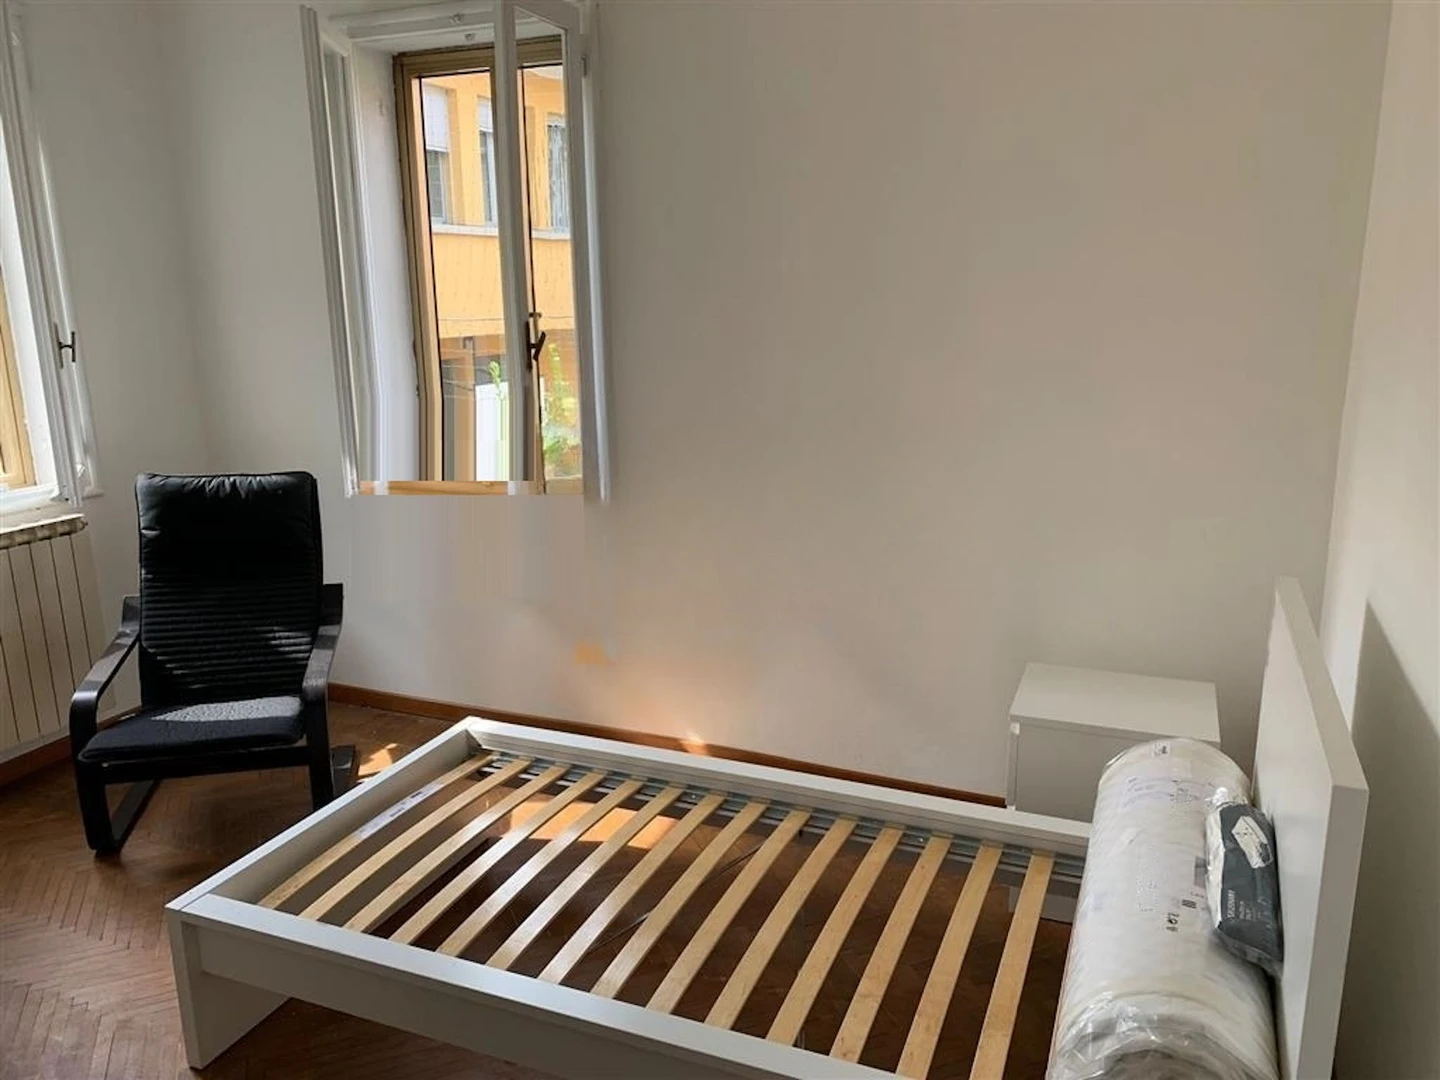 Room for rent in a shared flat in Venezia